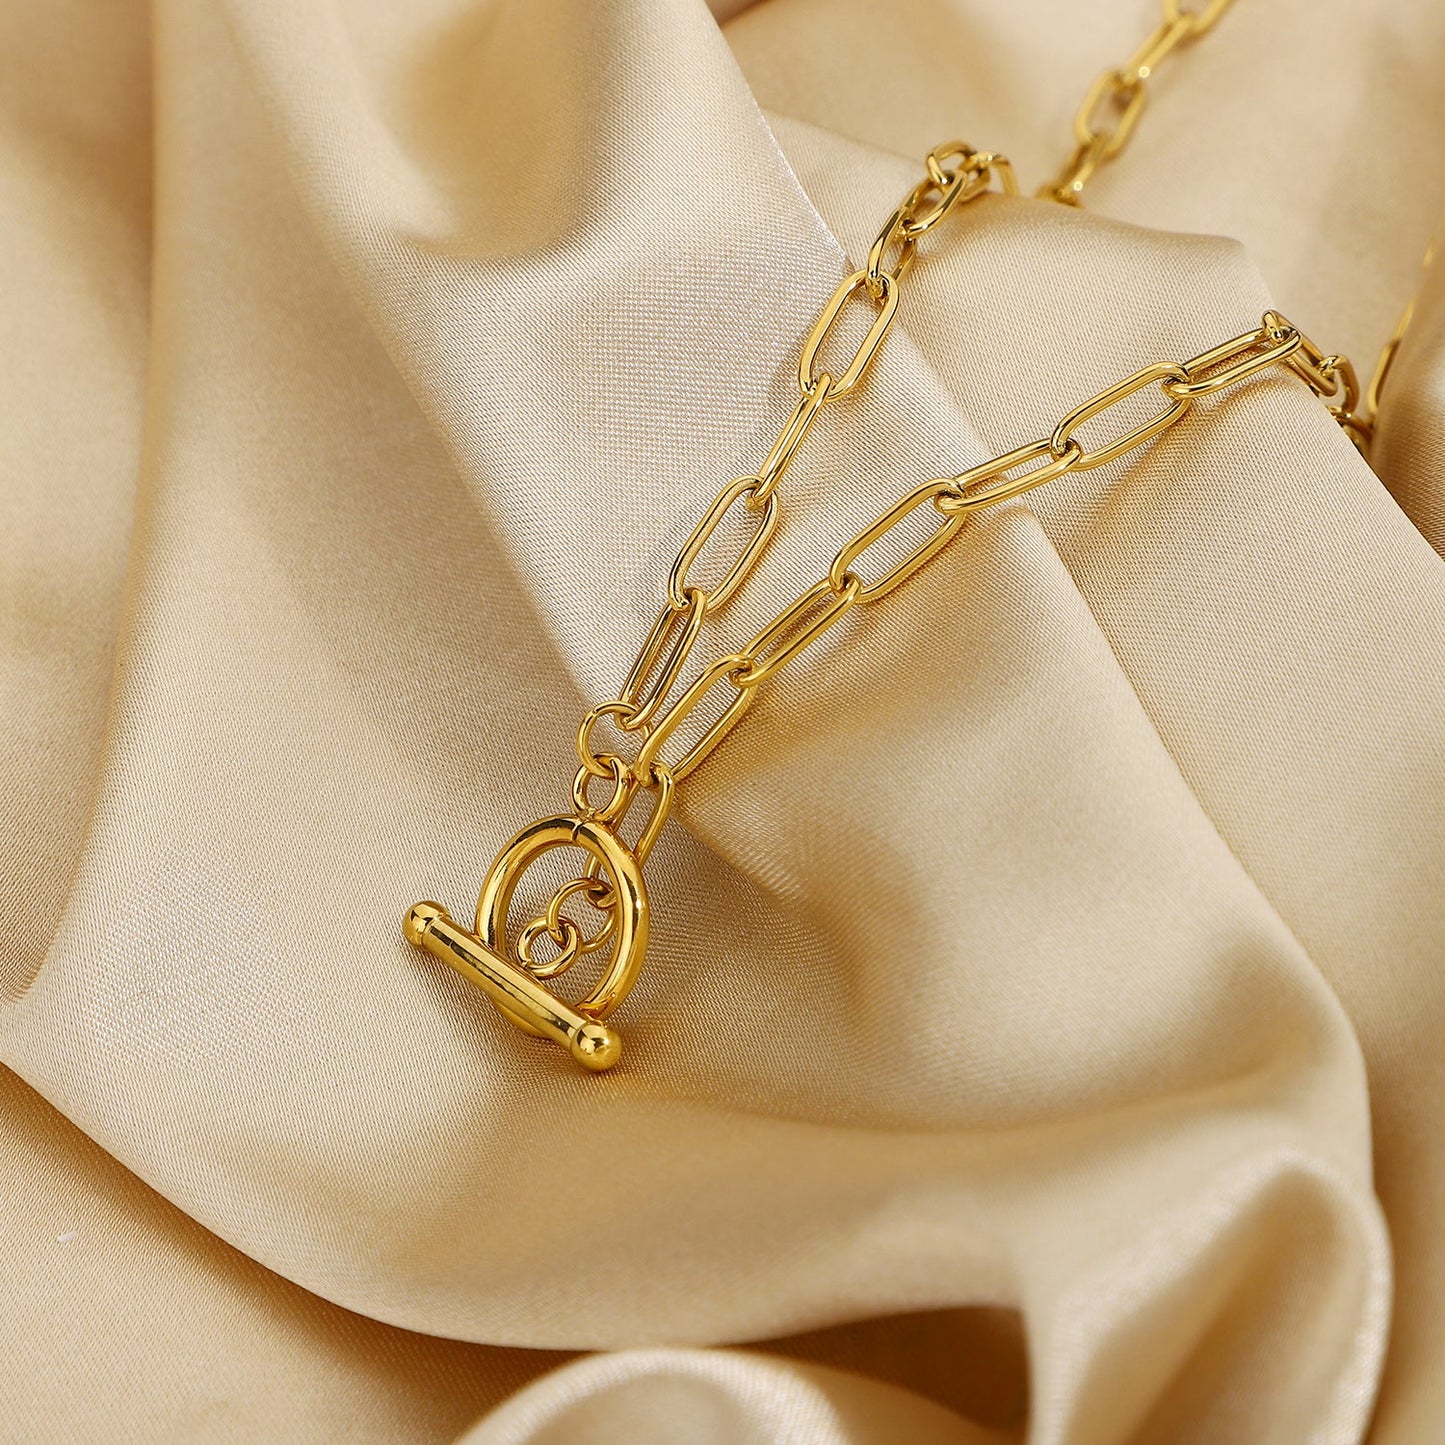 Gold Chain Toggle NecklaceNecklaceBeach Rose Co.